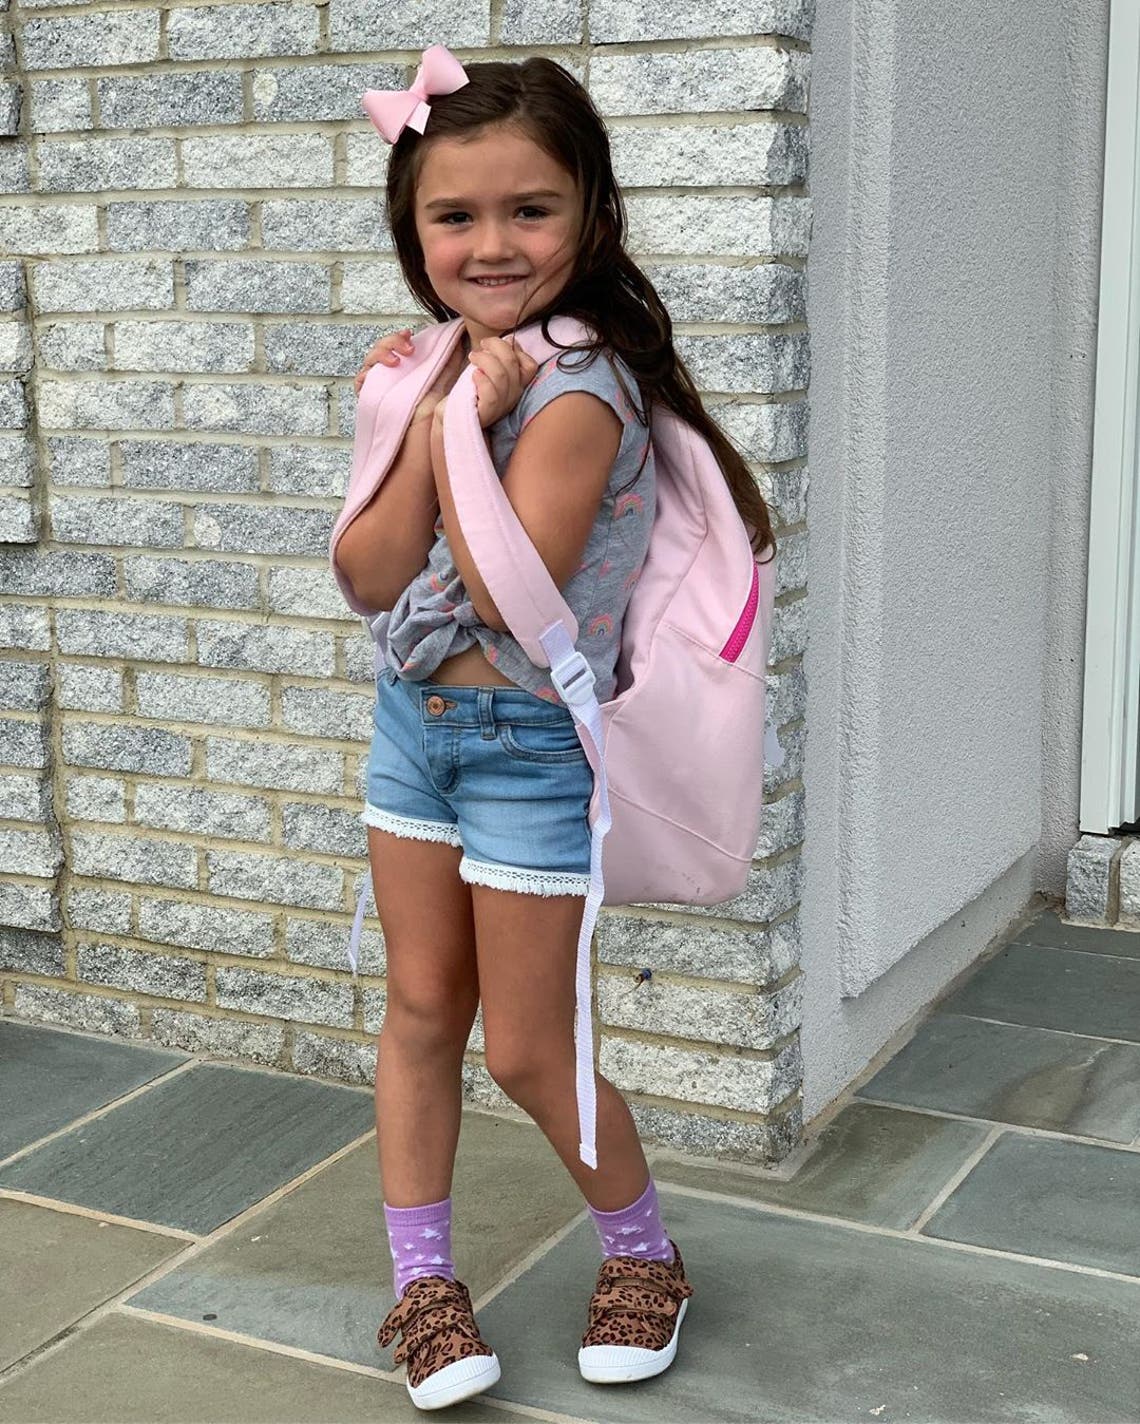 Hollywood's Famous Tots Head Back to School